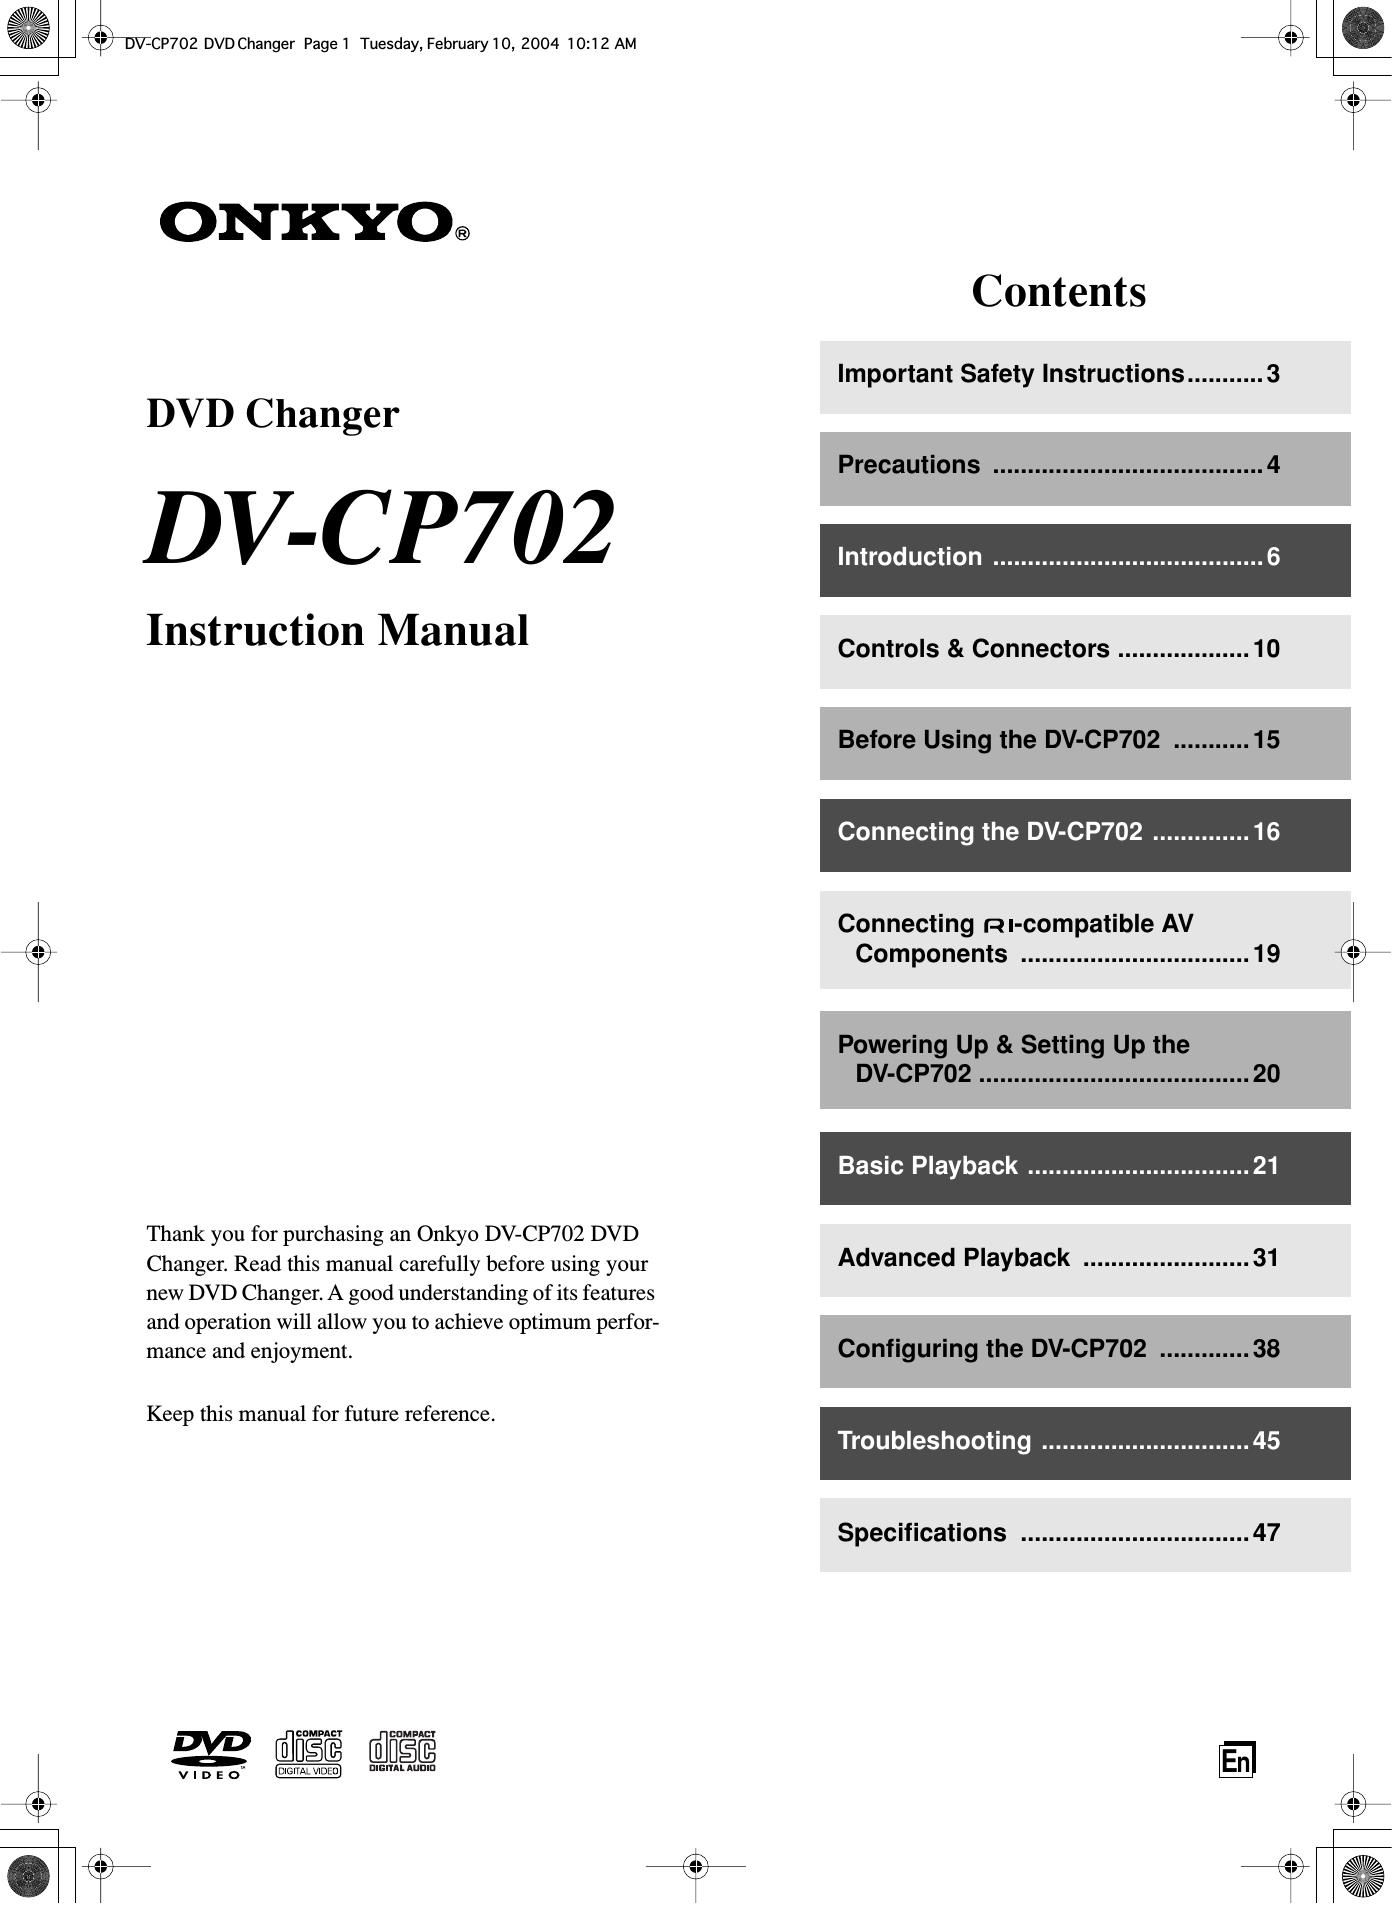 Onkyo DVCP 702 Owners Manual